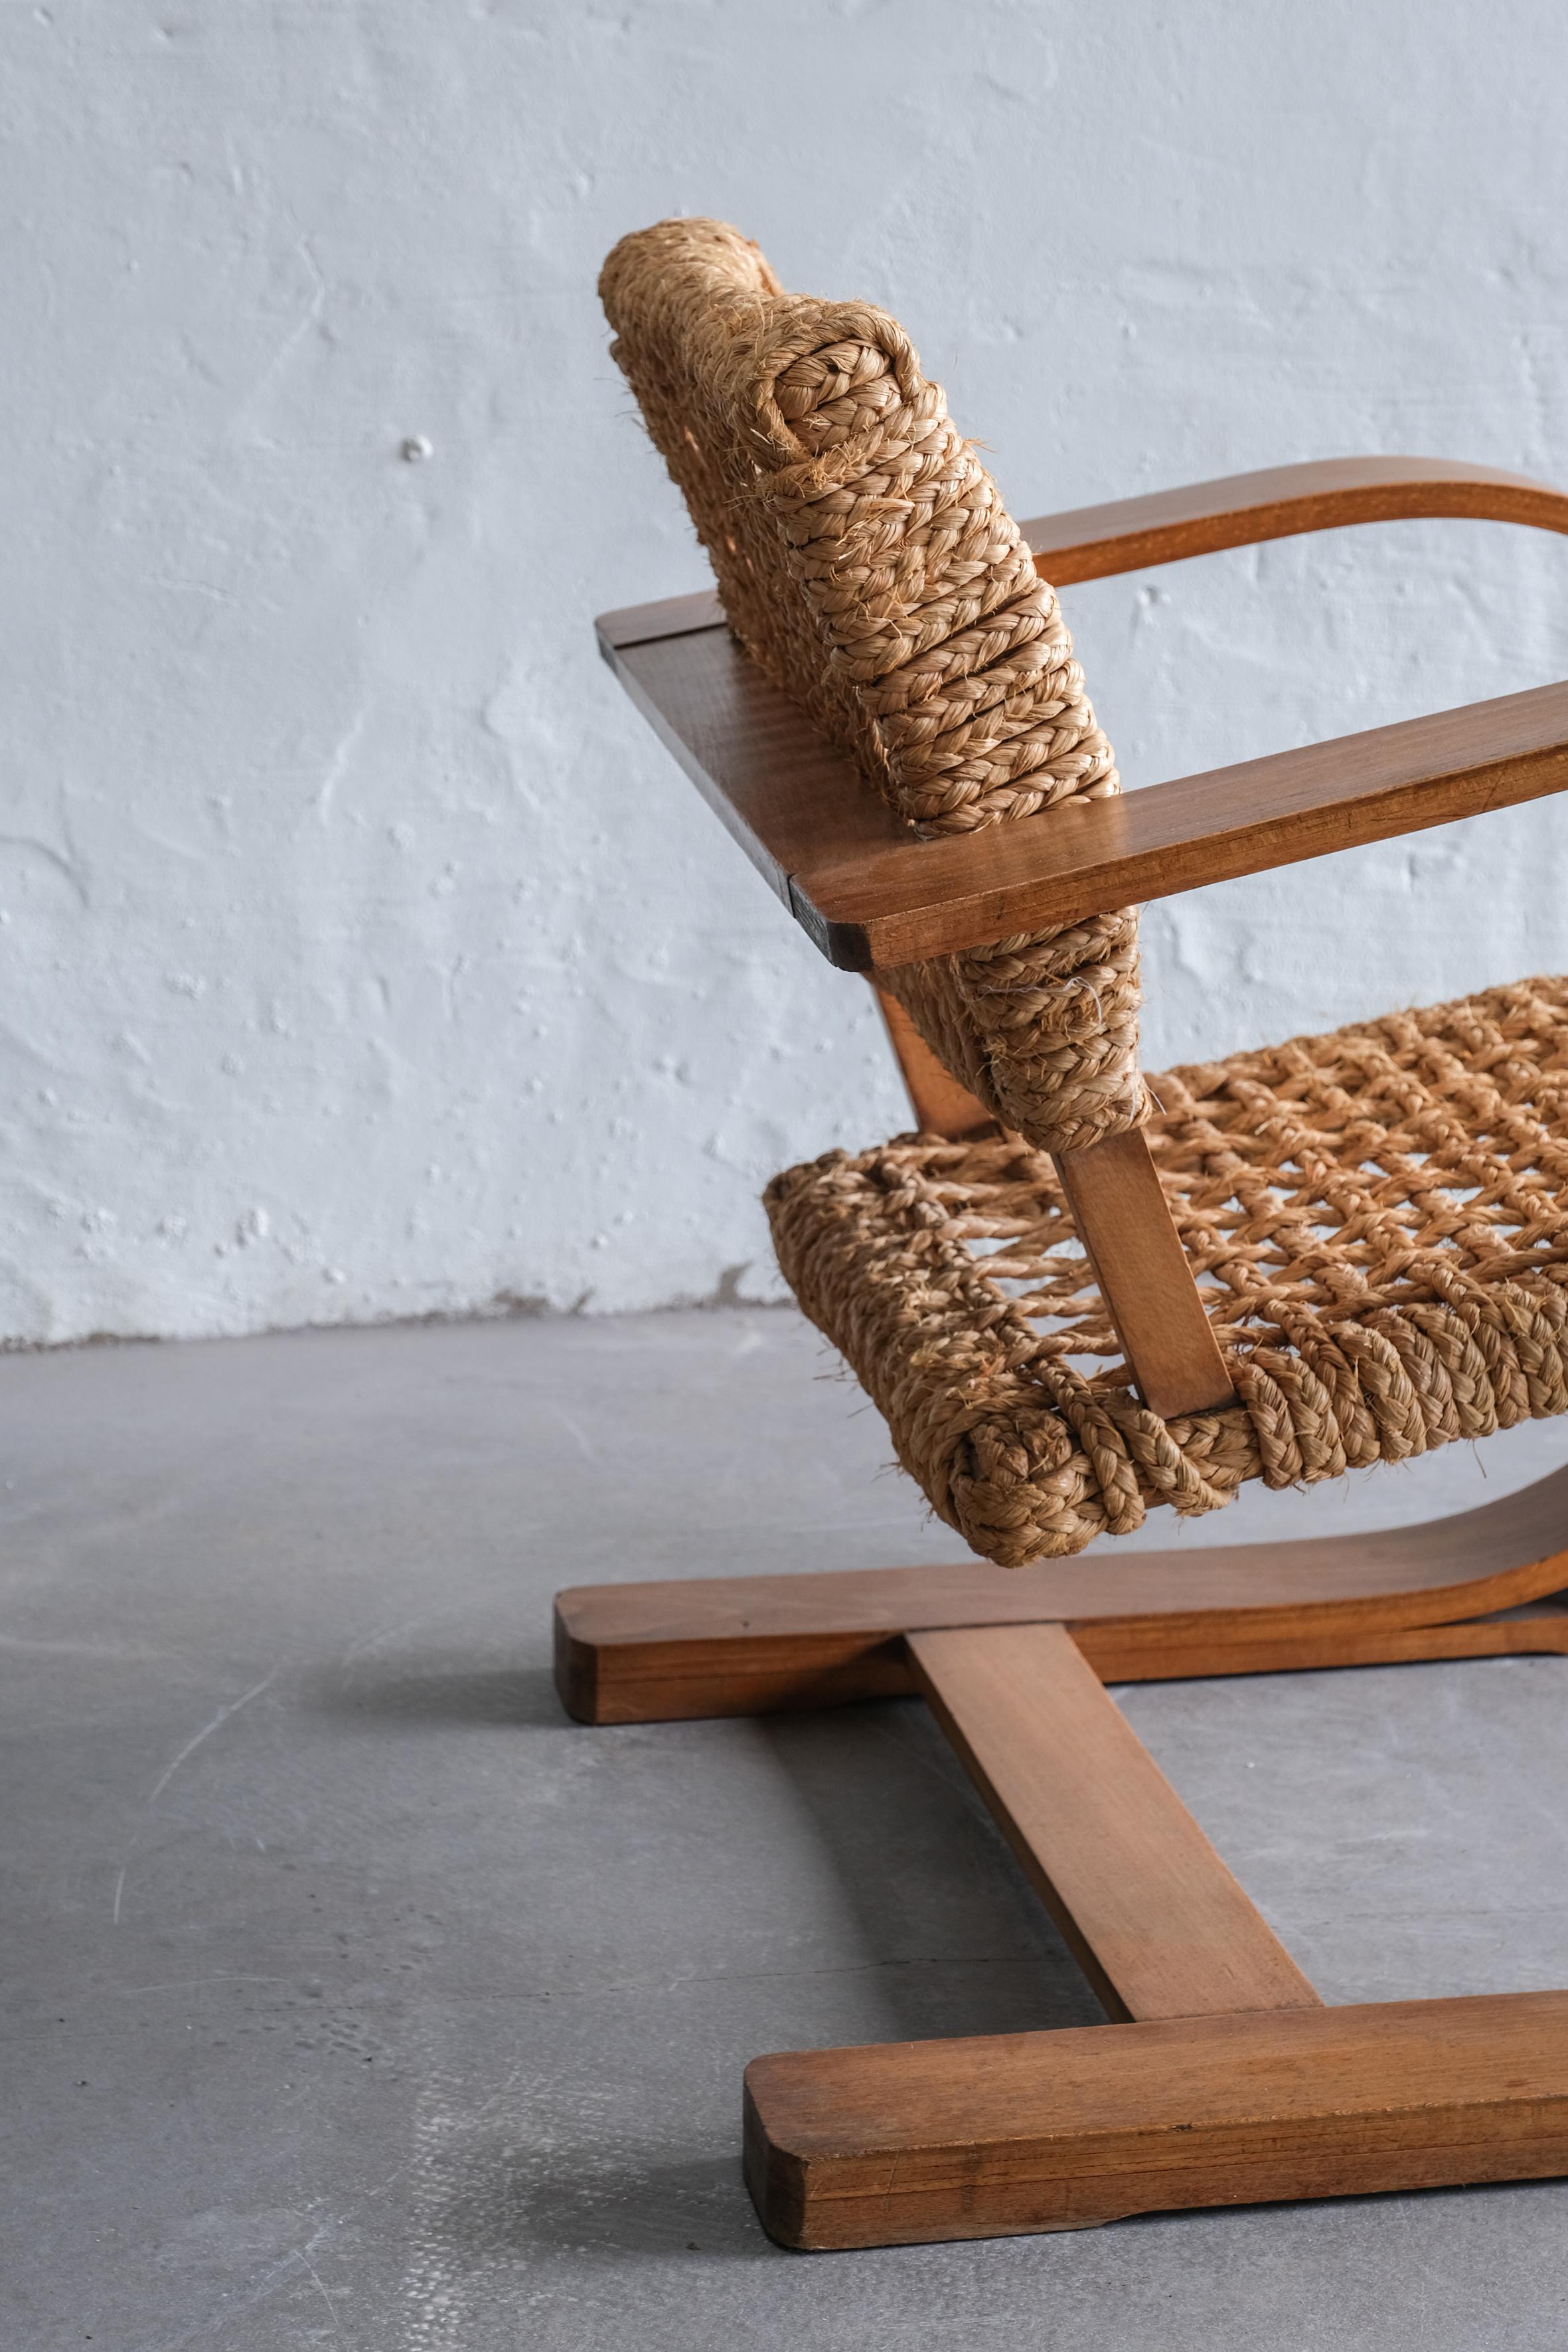 20th Century Lounge chair also known as Rope chair by Audoux Minet 1950